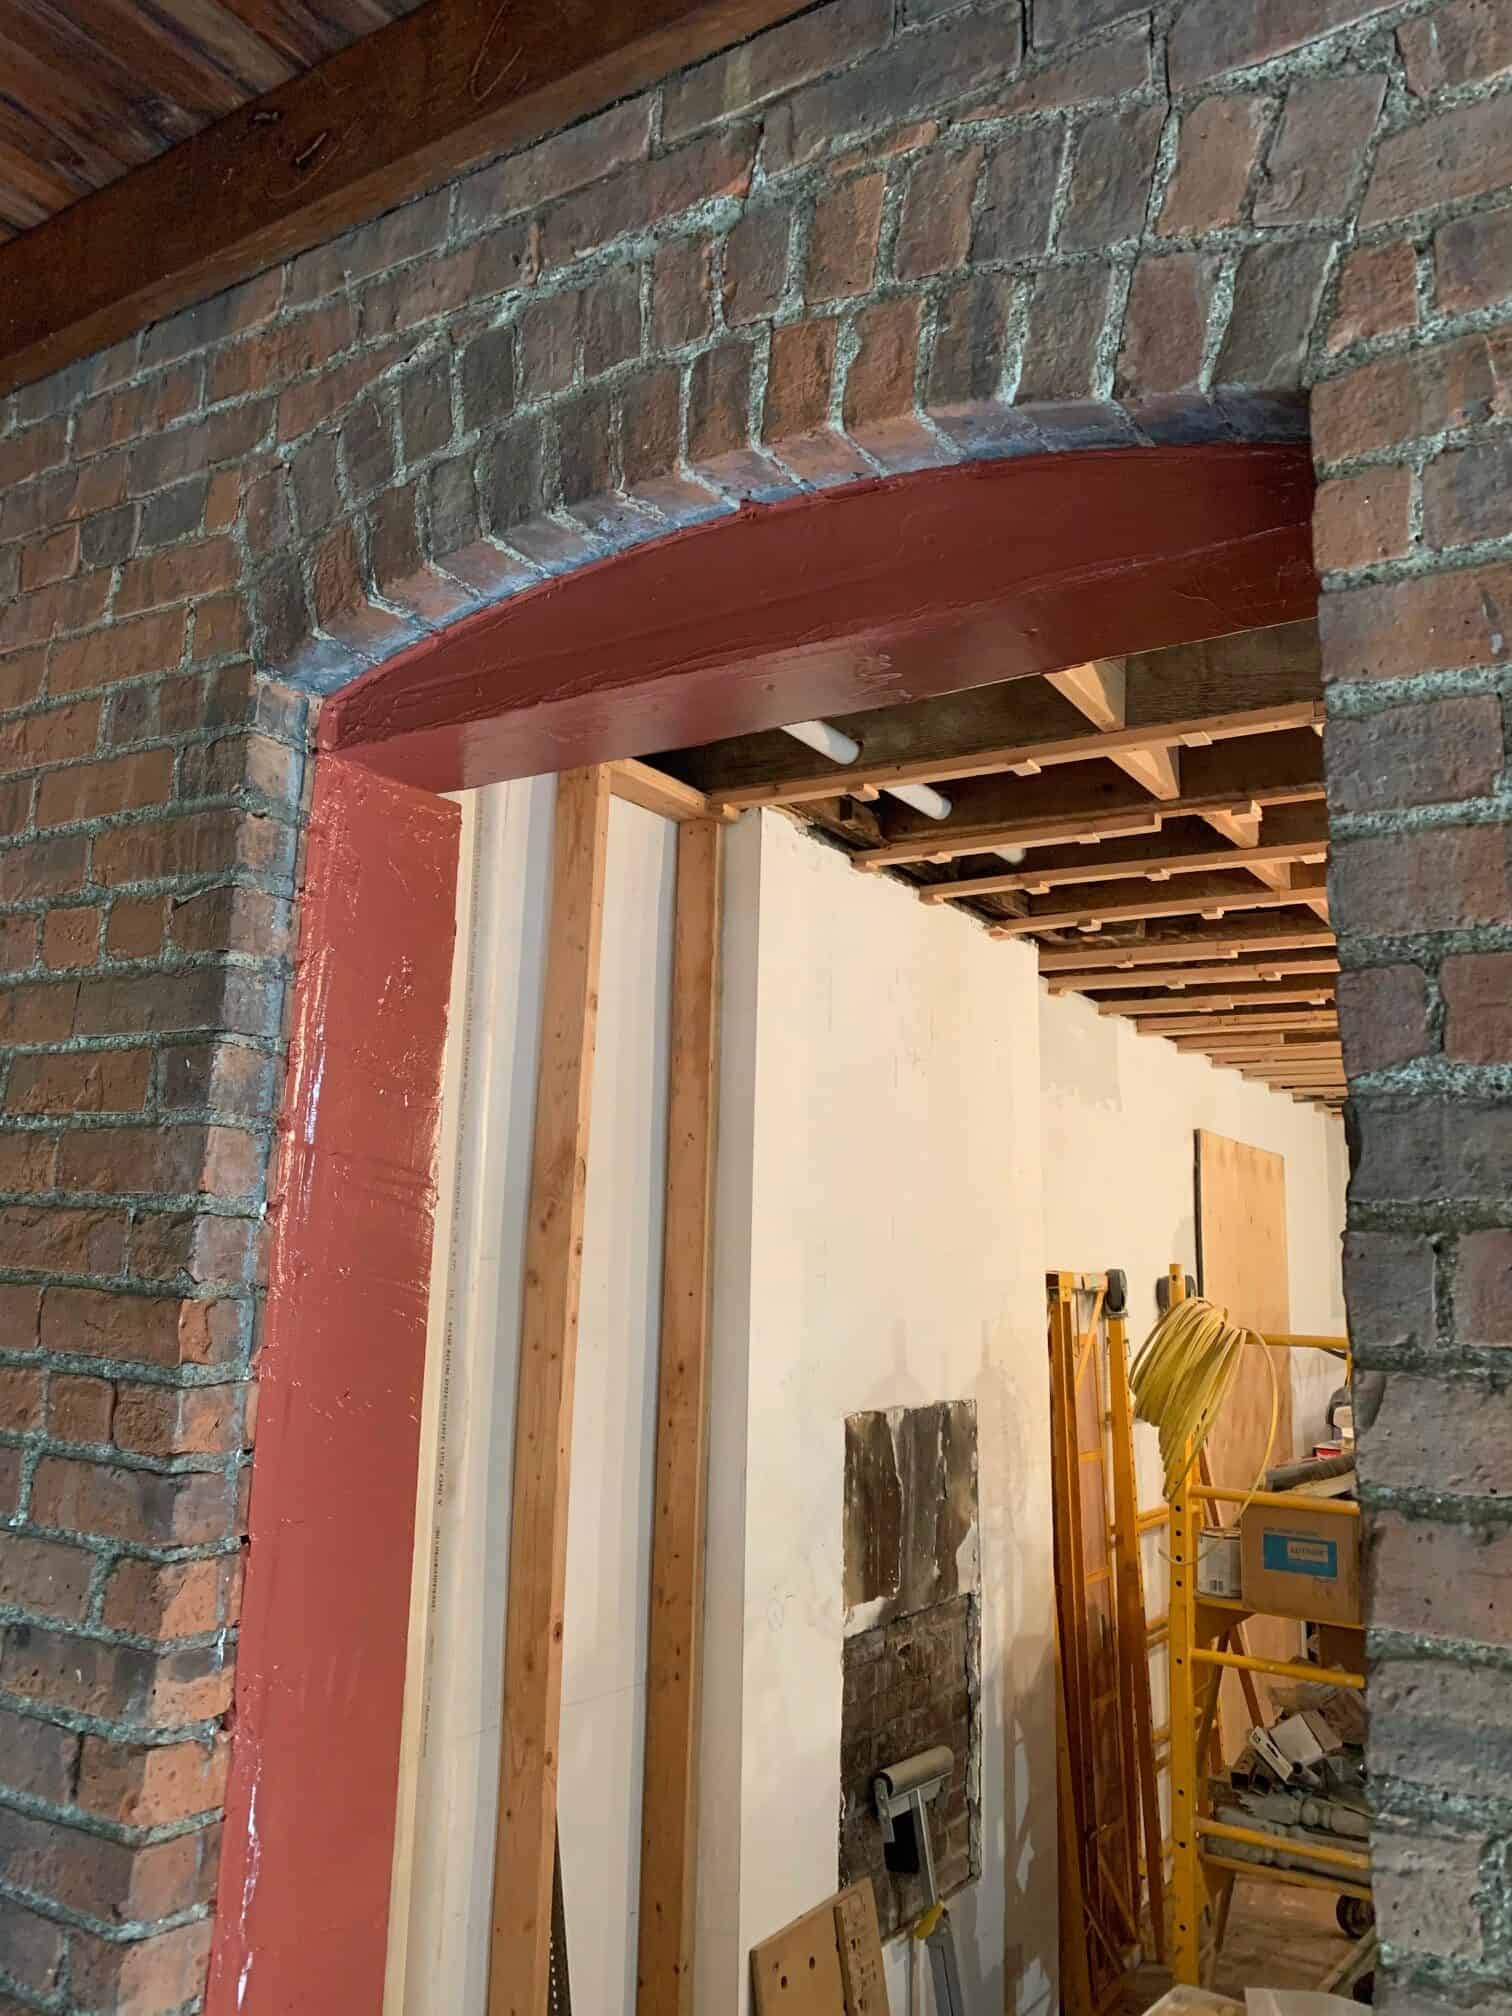 FastFlash is the ideal waterproofing membrane to go around rough openings during commercial window replacement projects. Photo courtesy PROSOCO